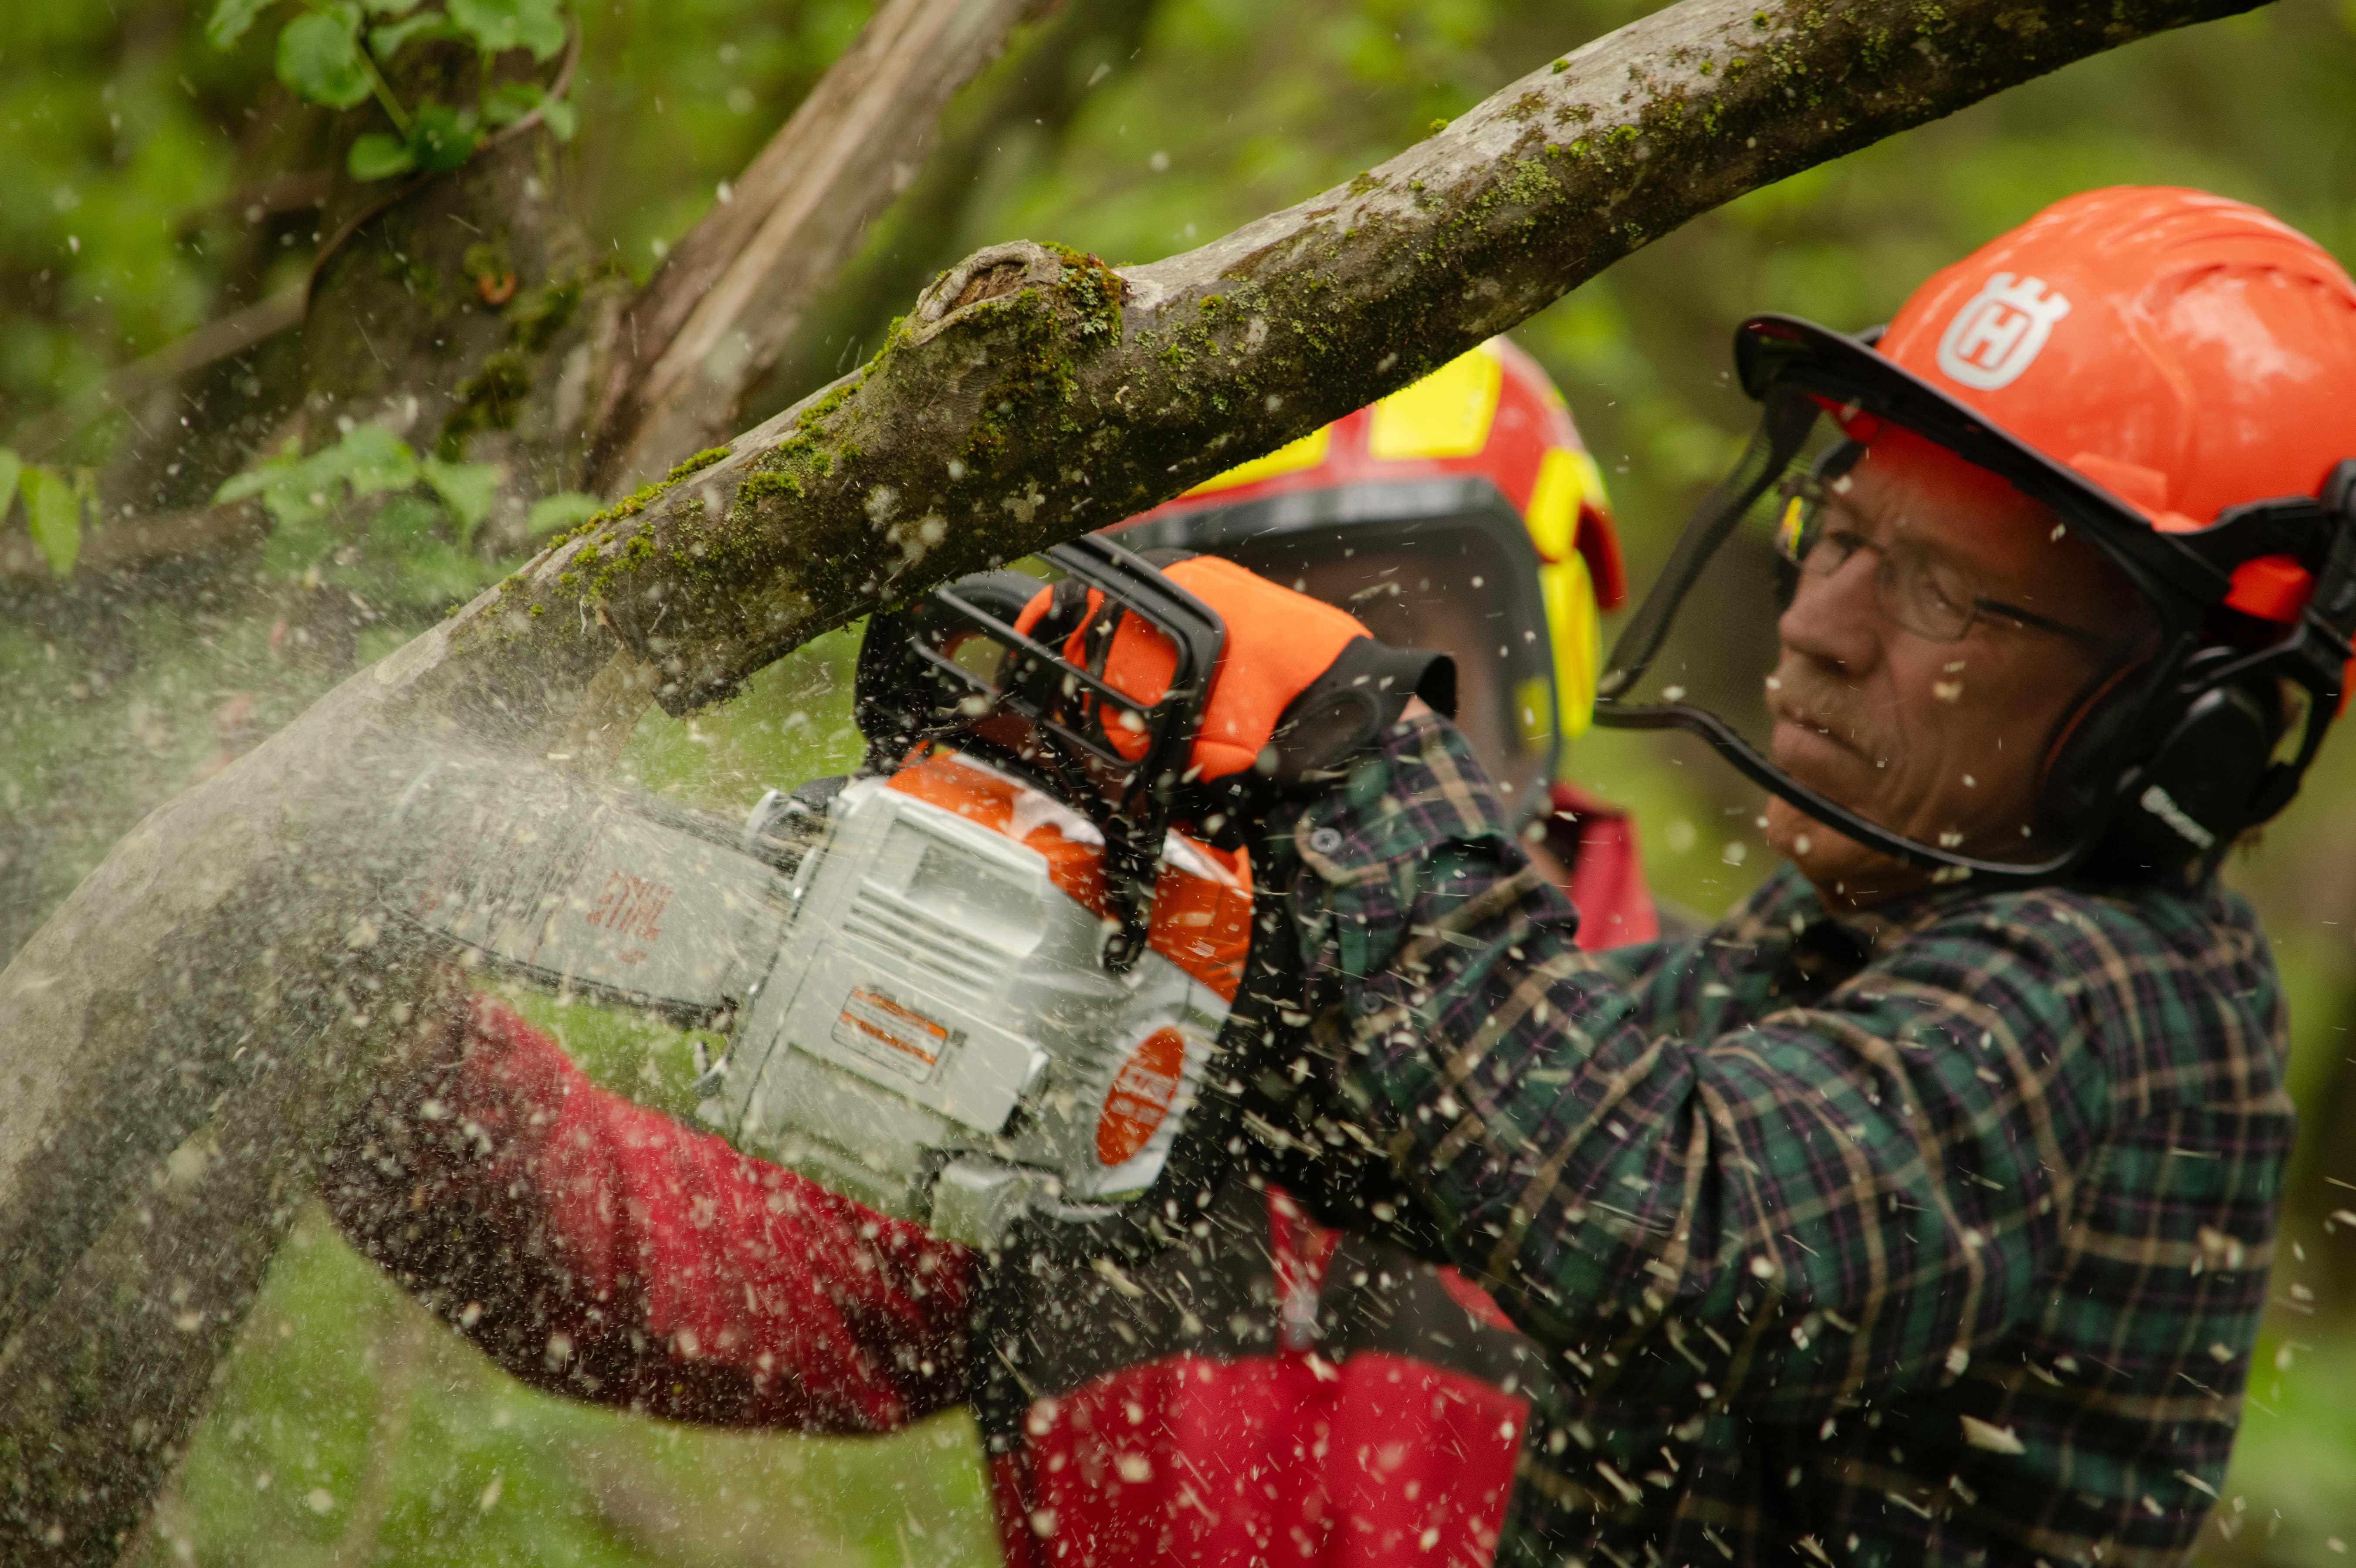 A person wearing an orange helmet cuts a tree branch with a chainsaw.